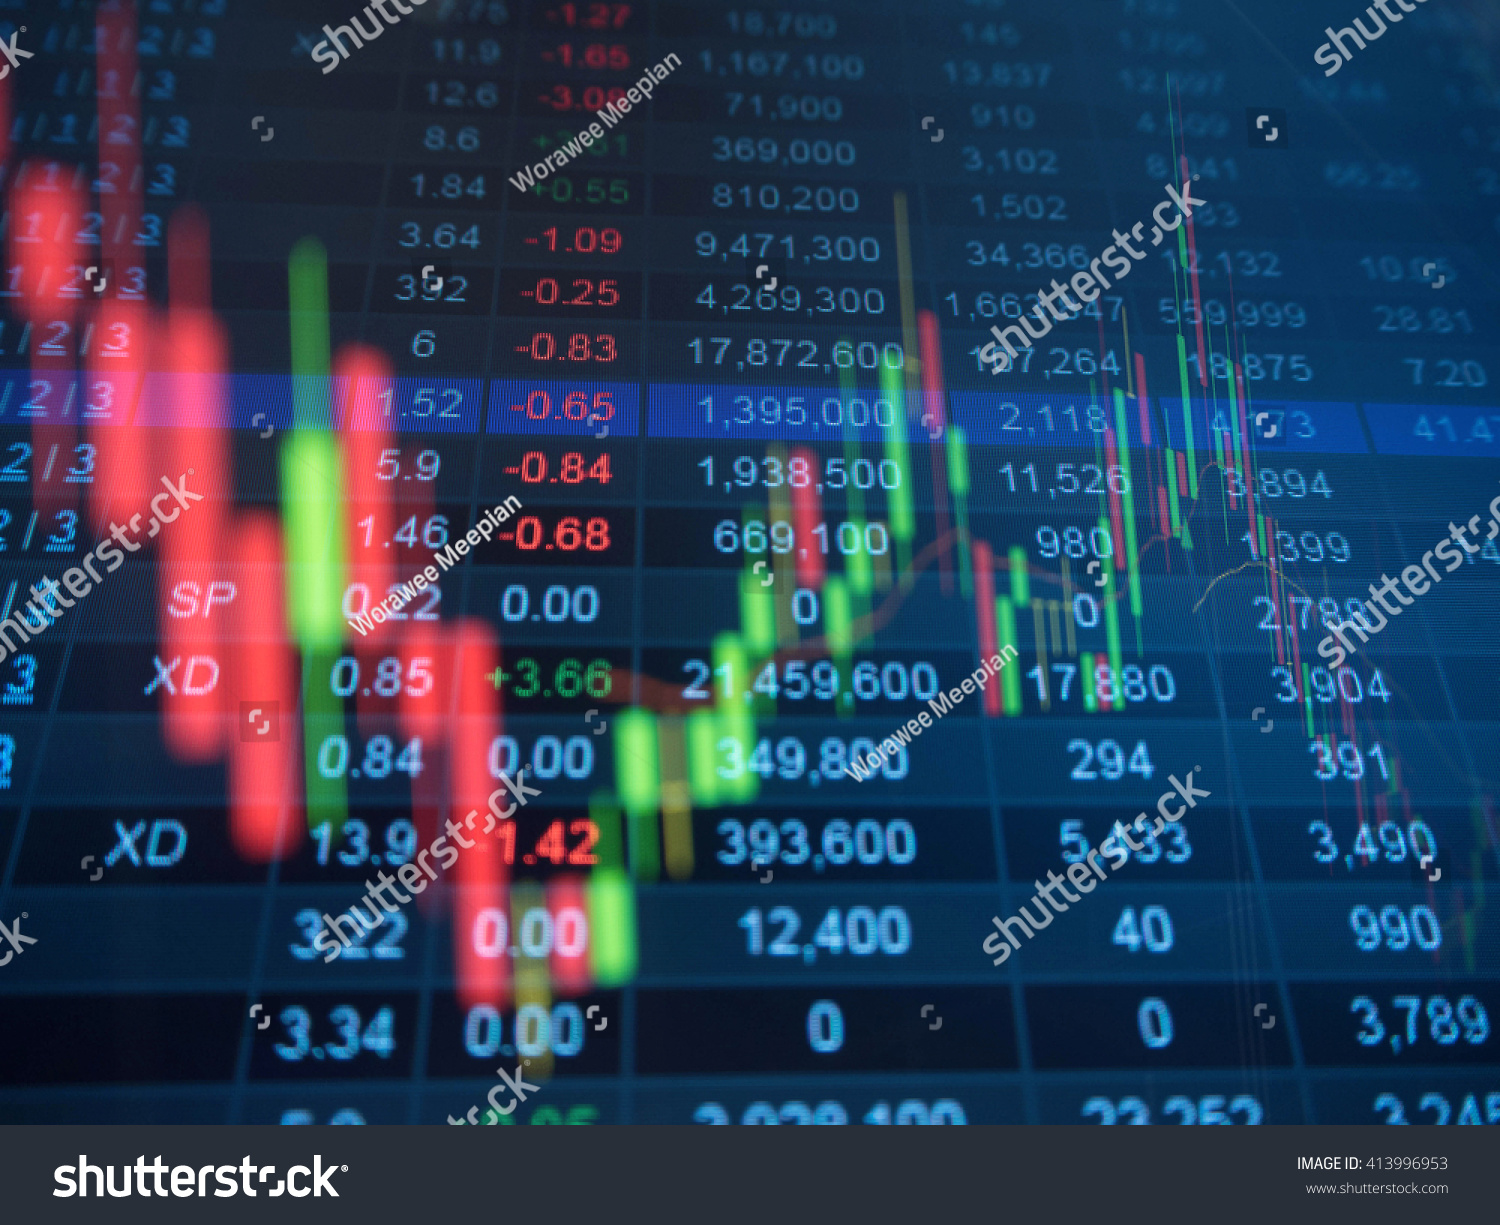 Double exposure of stocks market chart and stock data  in blue on LED display concept. #413996953